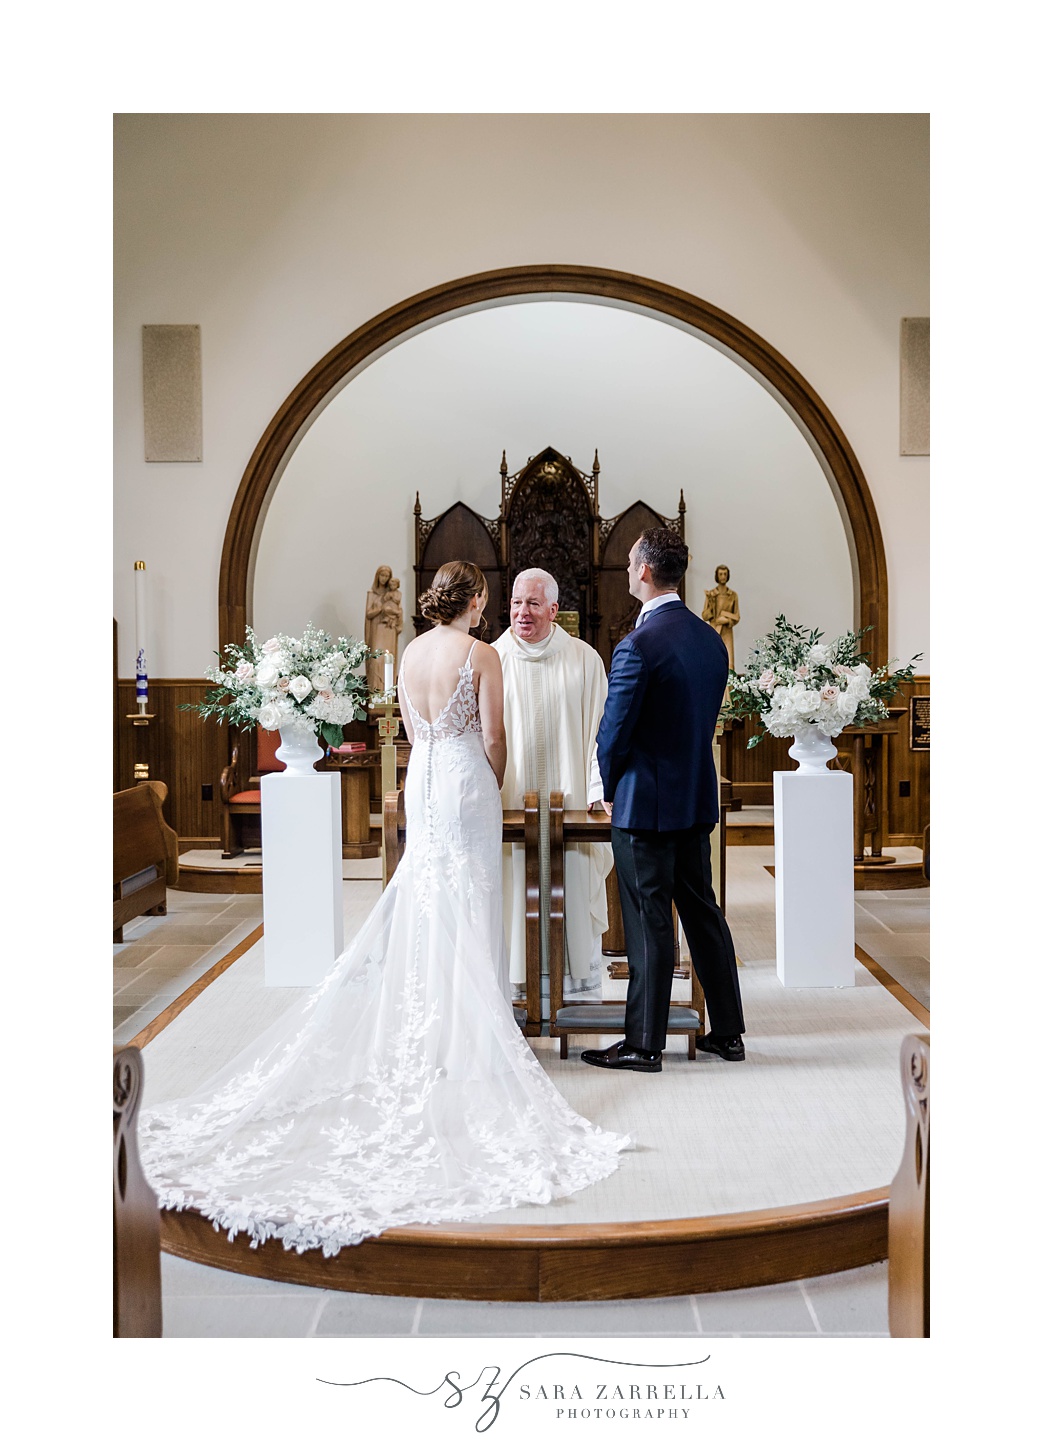 wedding ceremony at Our Lady of Mercy Chapel at Salve Regina University